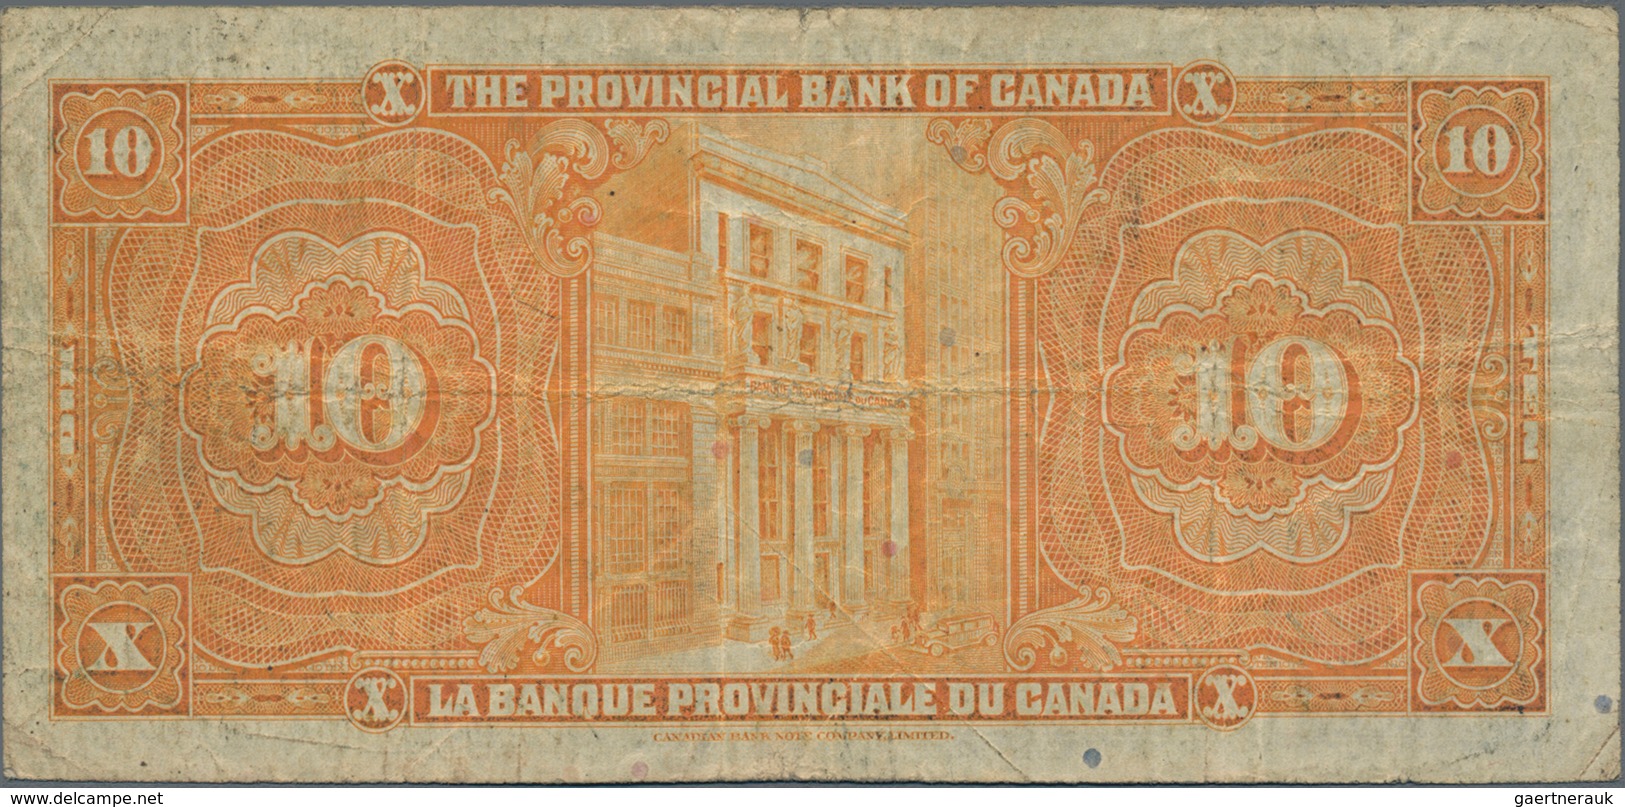 Canada: The Provincial Bank Of Canada 10 Dollars 1936, P.S922a, Still Nice With Bright Colors, Just - Kanada